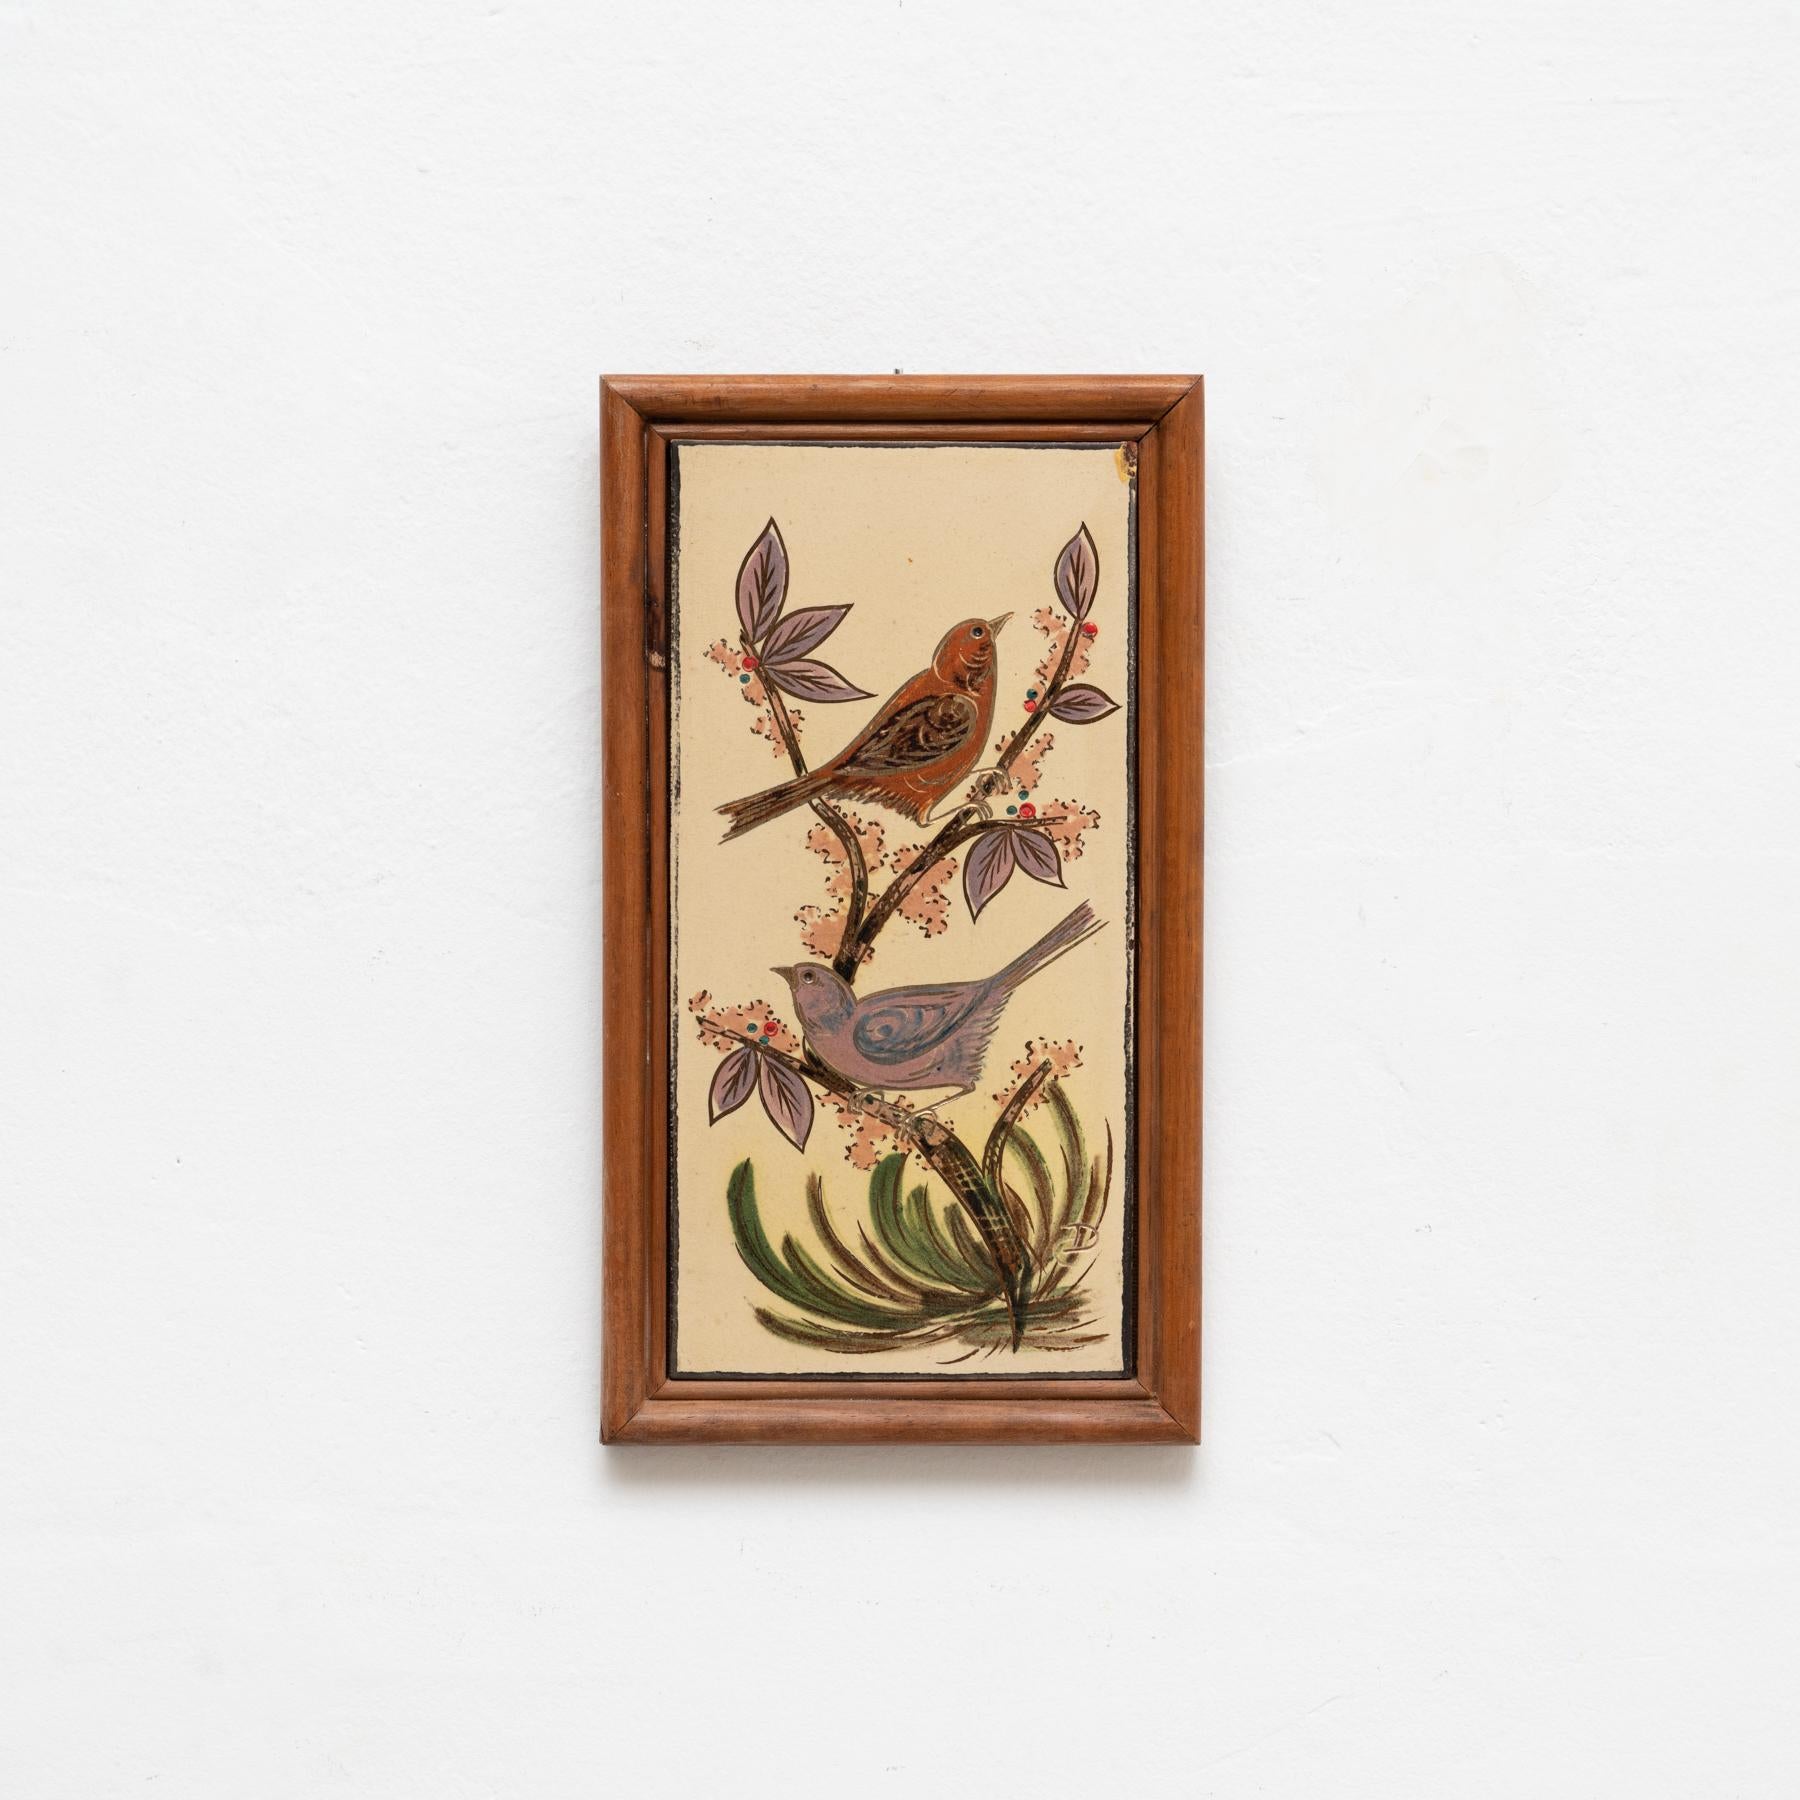 Ceramic hand painted artwork of two birds by Catalan artist Diaz Costa, circa 1960.
Framed. Signed.

In original condition, with minor wear consistent of age and use, preserving a beautiul patina.